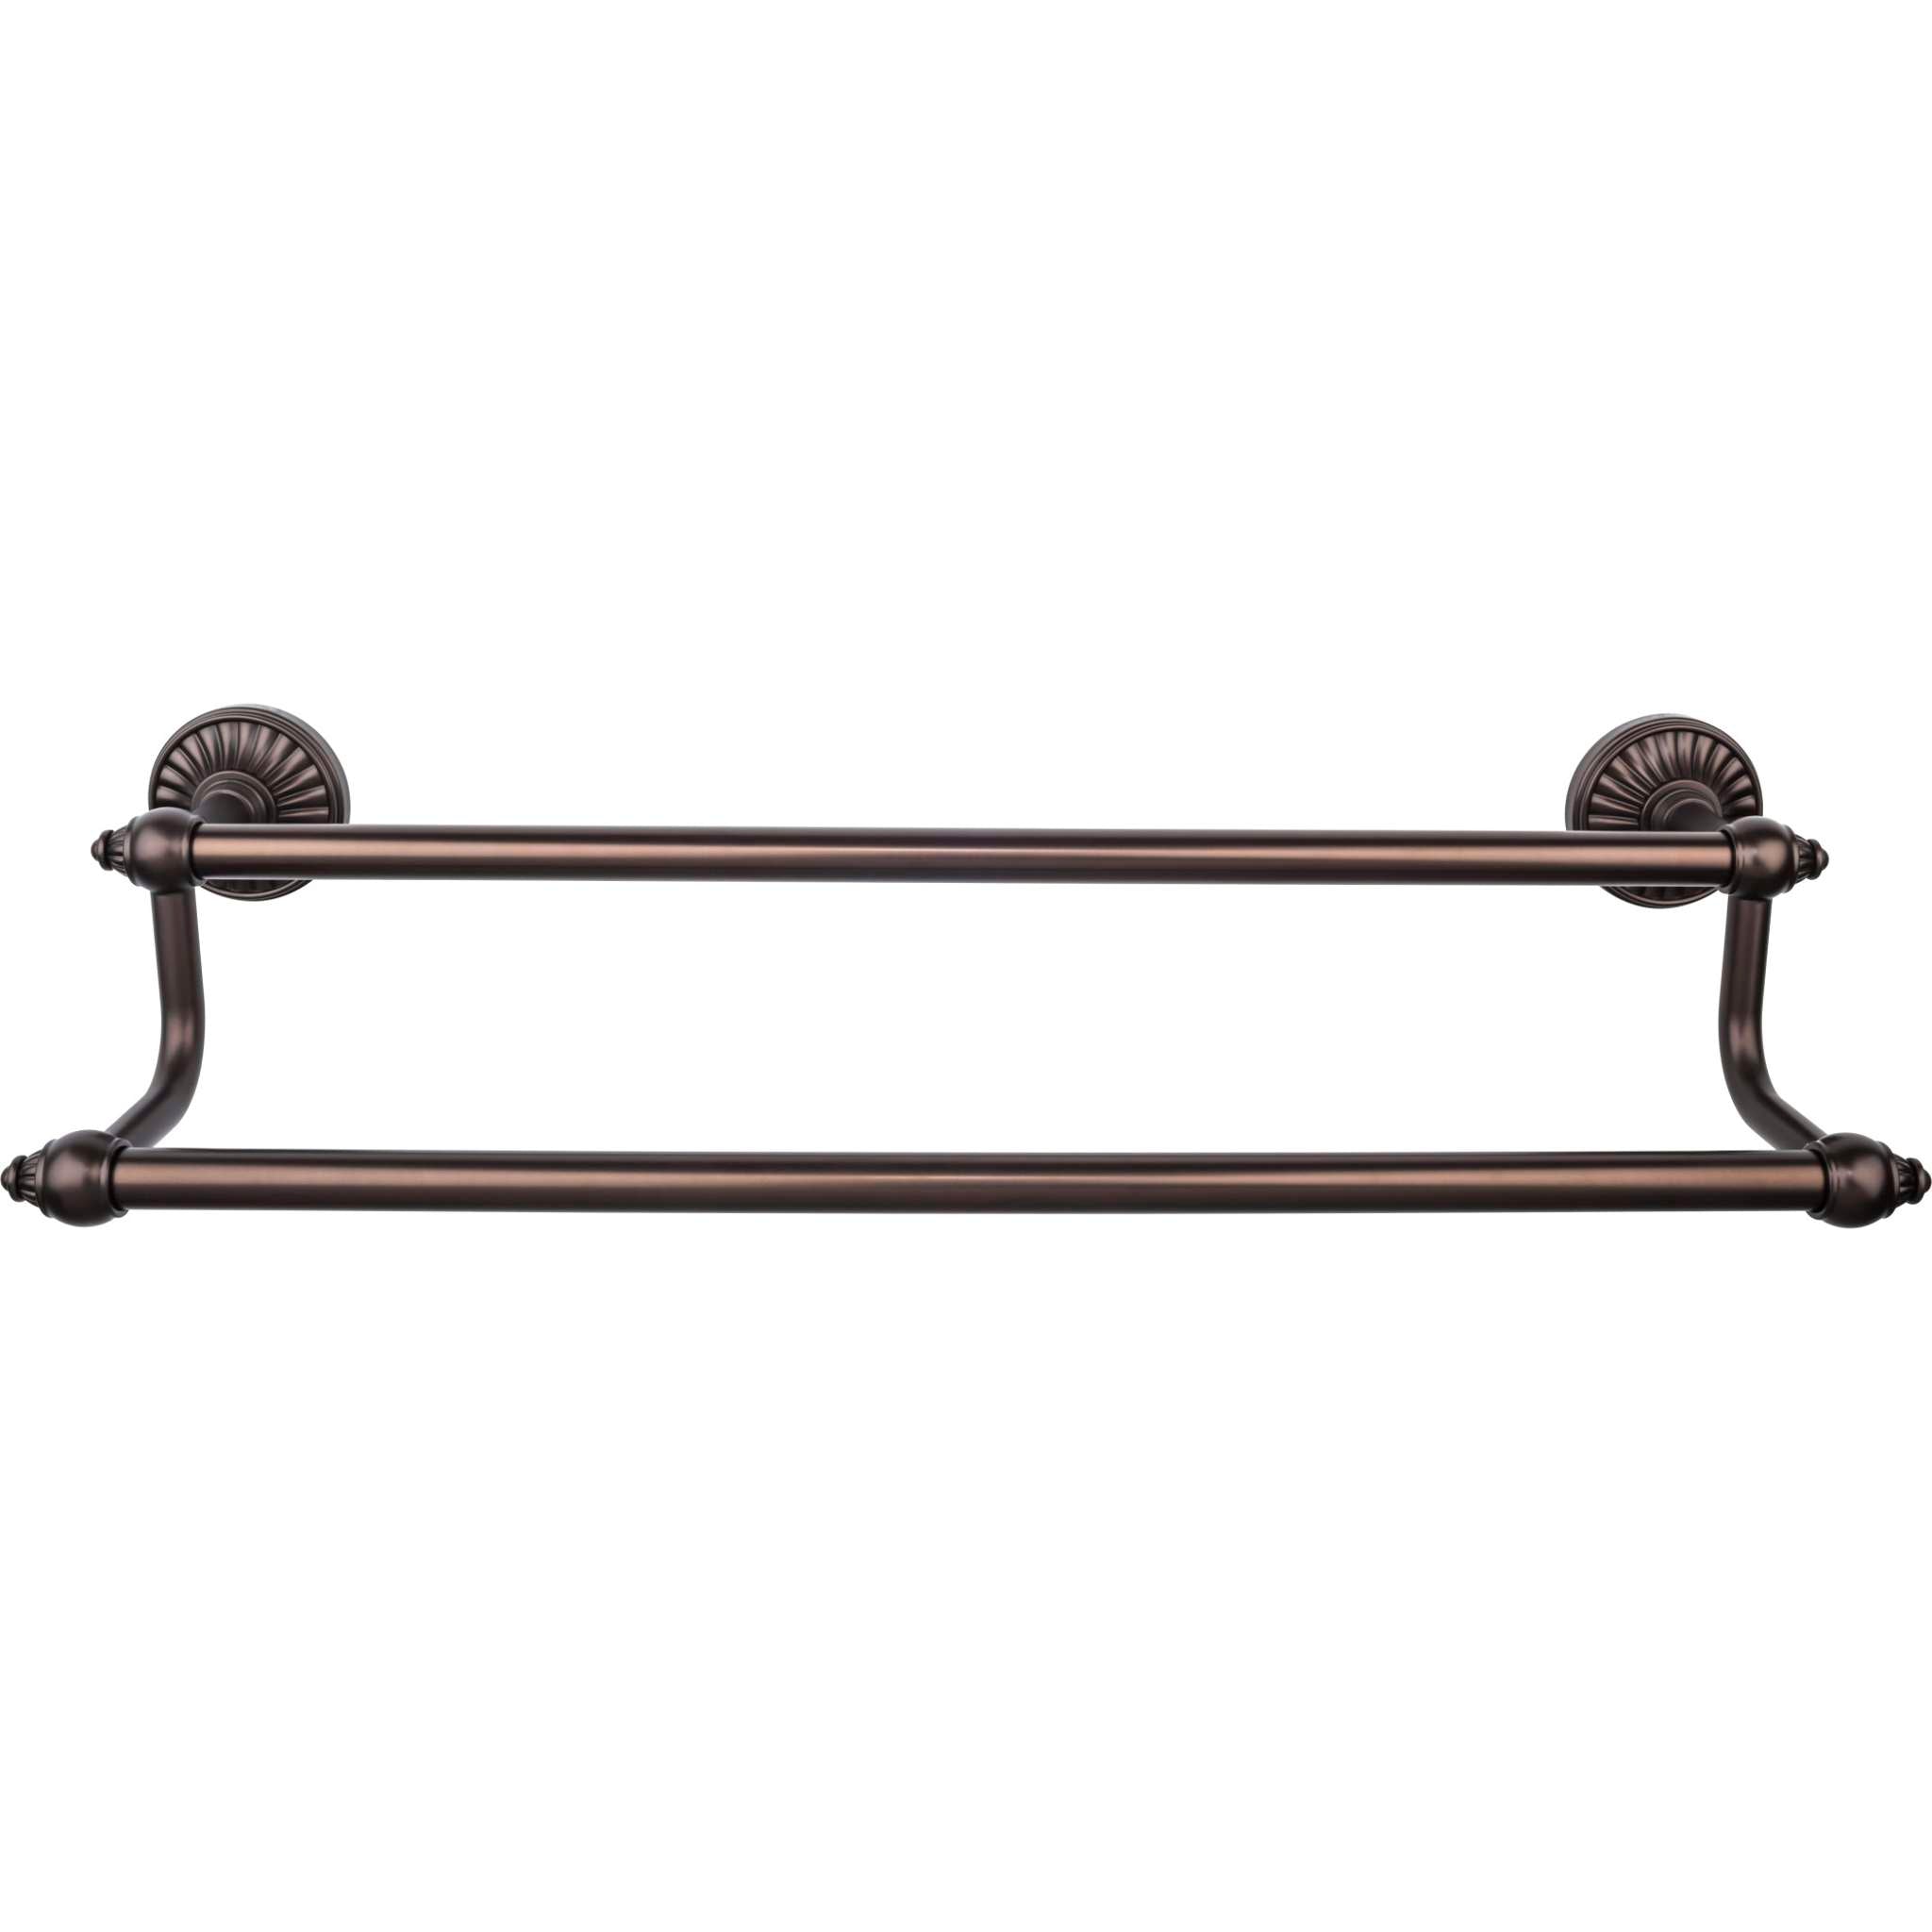 Top Knobs - Tuscany Bath Towel Bar 30 Inch Double Brushed Satin Nickel